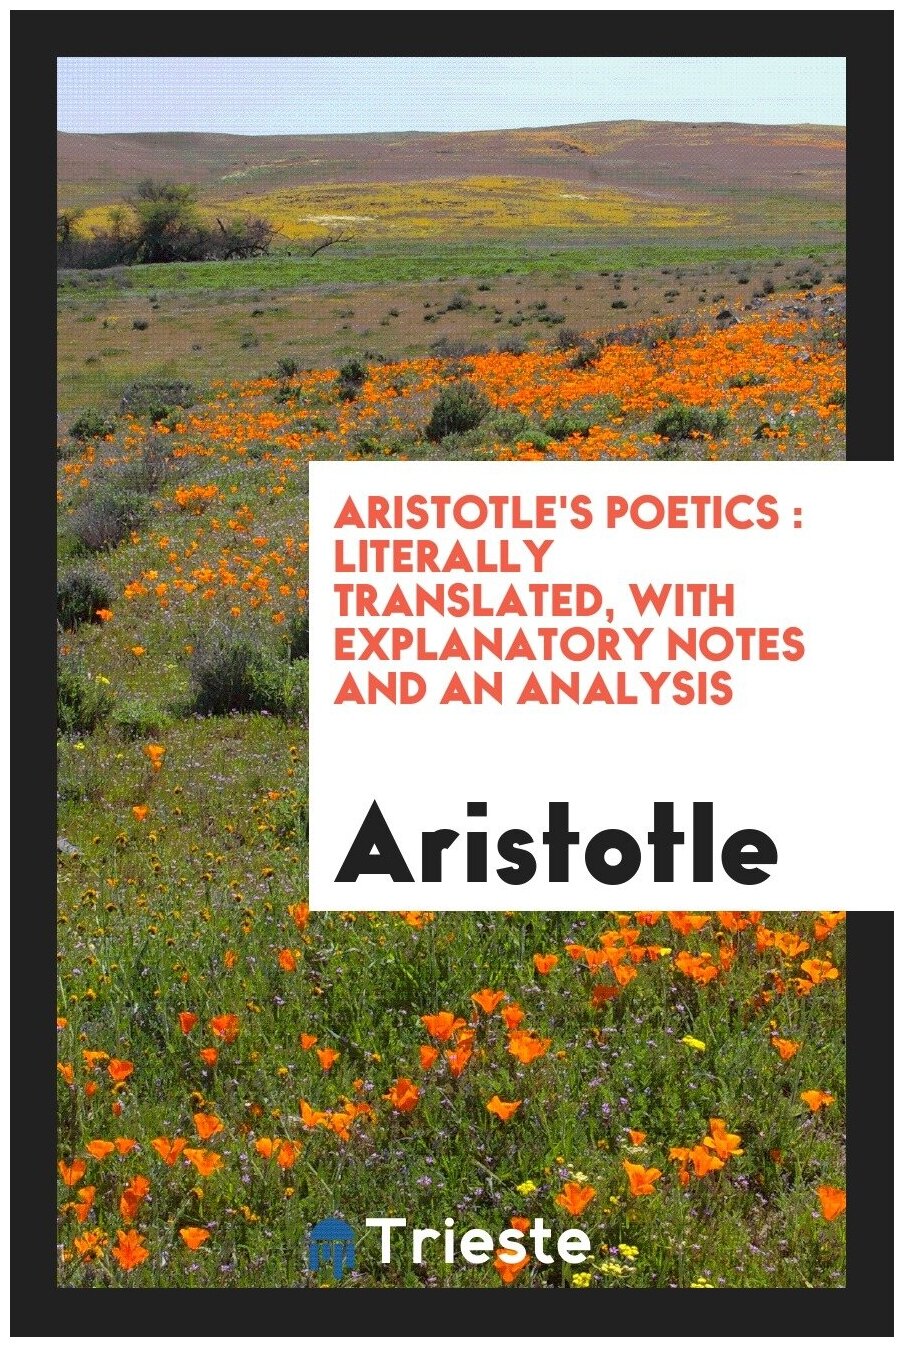 Aristotle's poetics. literally translated, with explanatory notes and an analysis